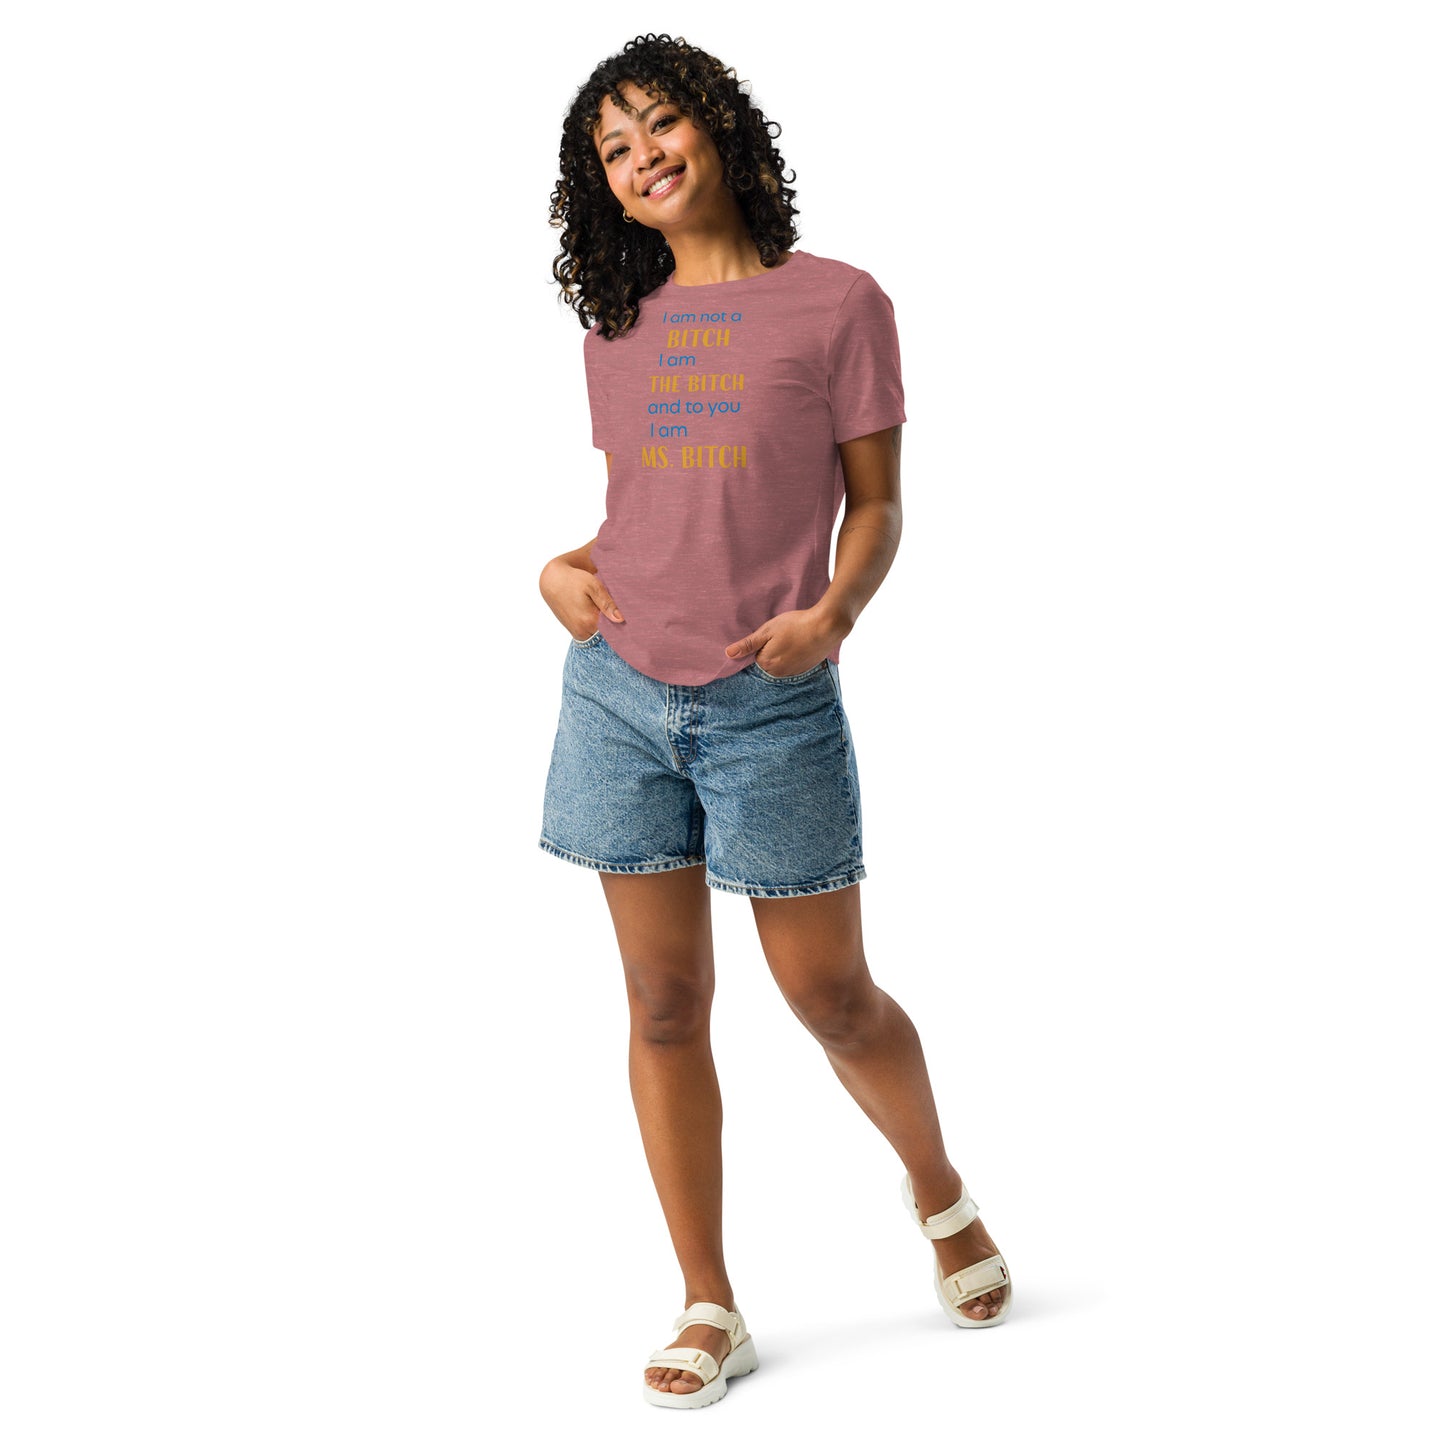 Women with mauve t-shirt with the text "to you I'm MS bitch"